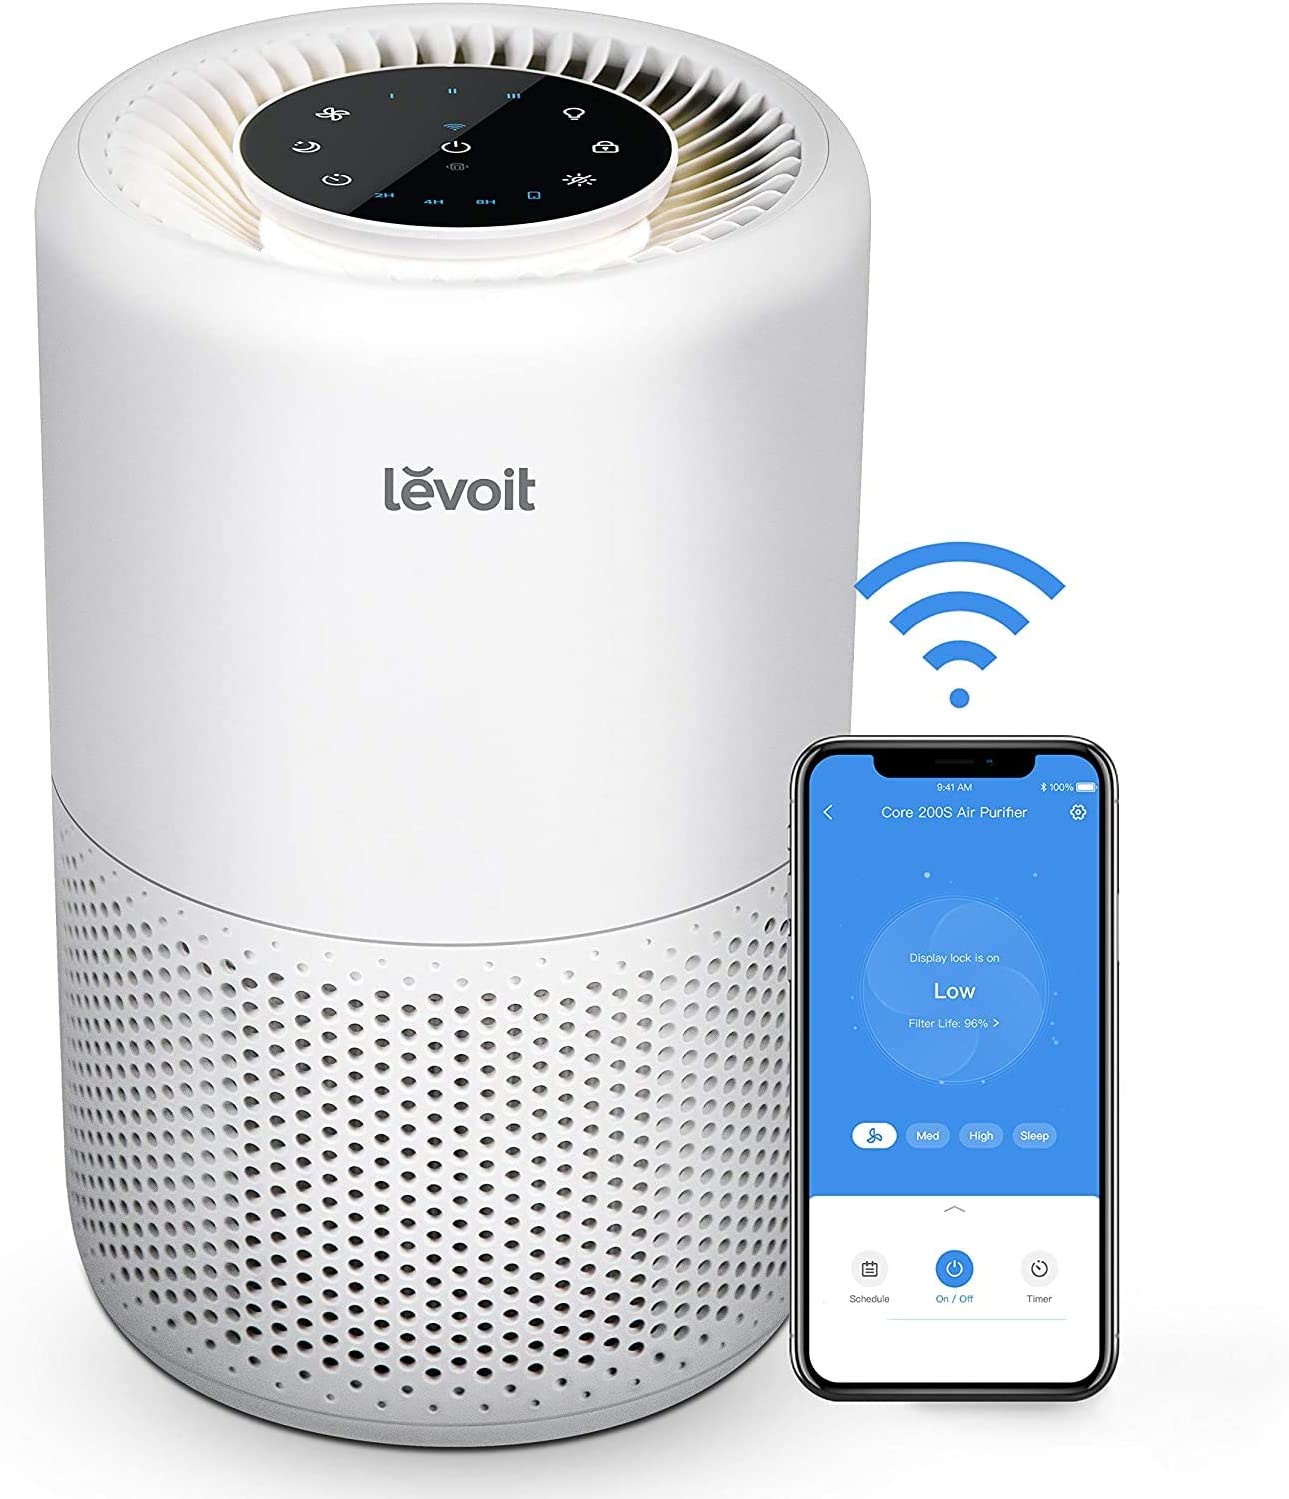  6. LEVOIT Smart Air Purifier for Home and Bedroom with Smart Wi-Fi 